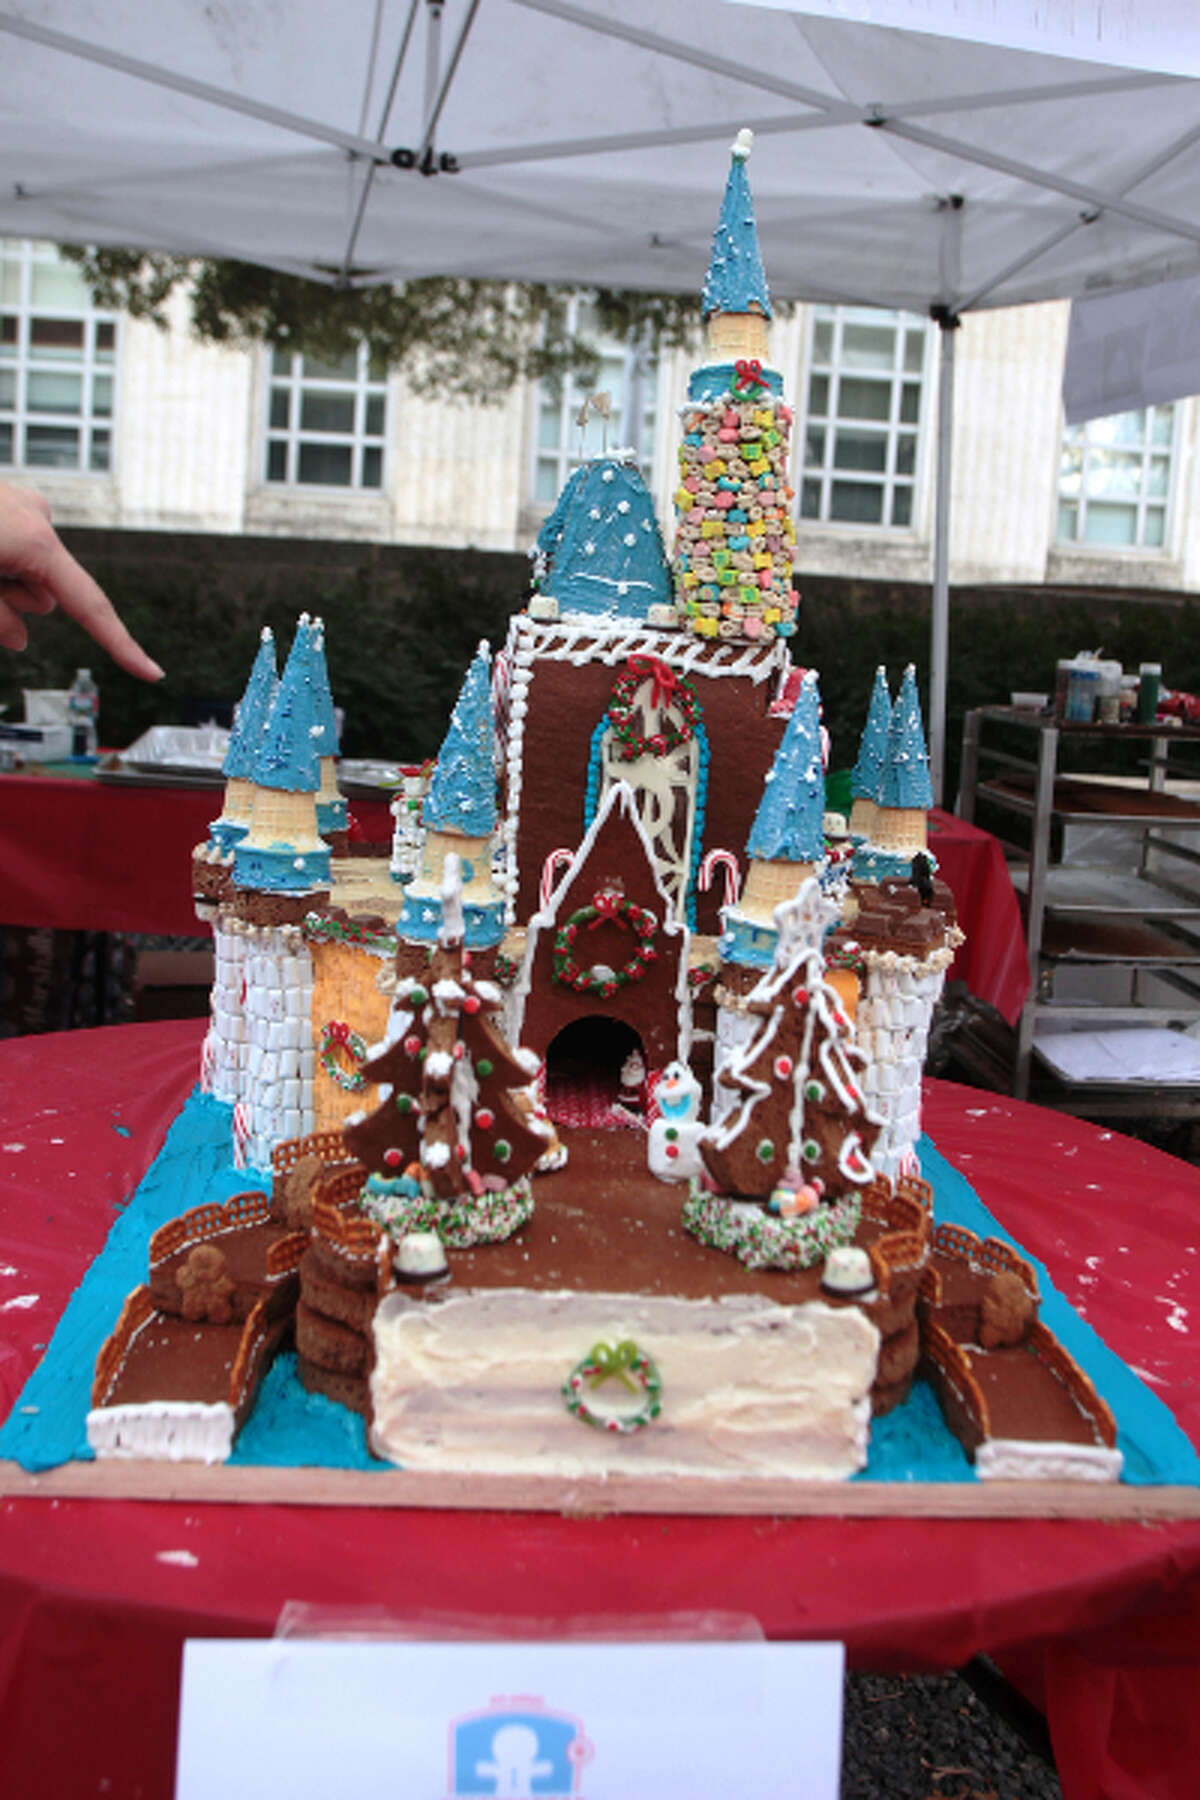 A Cinderella's Castlewas an entry in a past Gingerbread Build-Off.